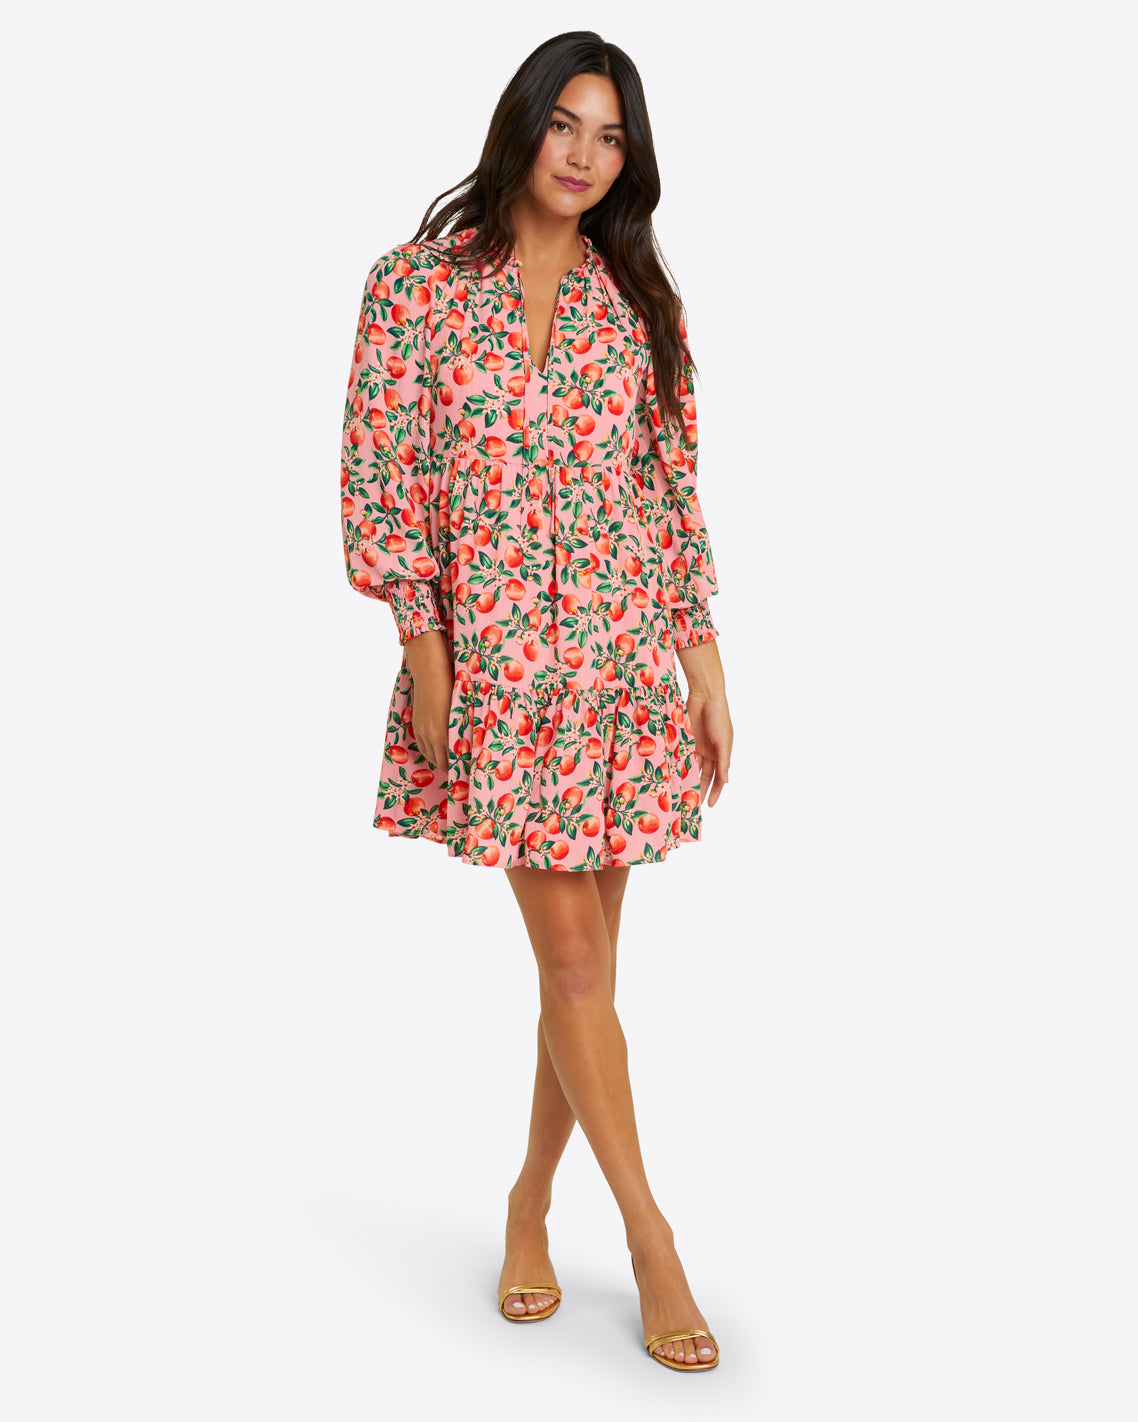 Connie Long-Sleeve Mini Dress in Apple Blossom Floral